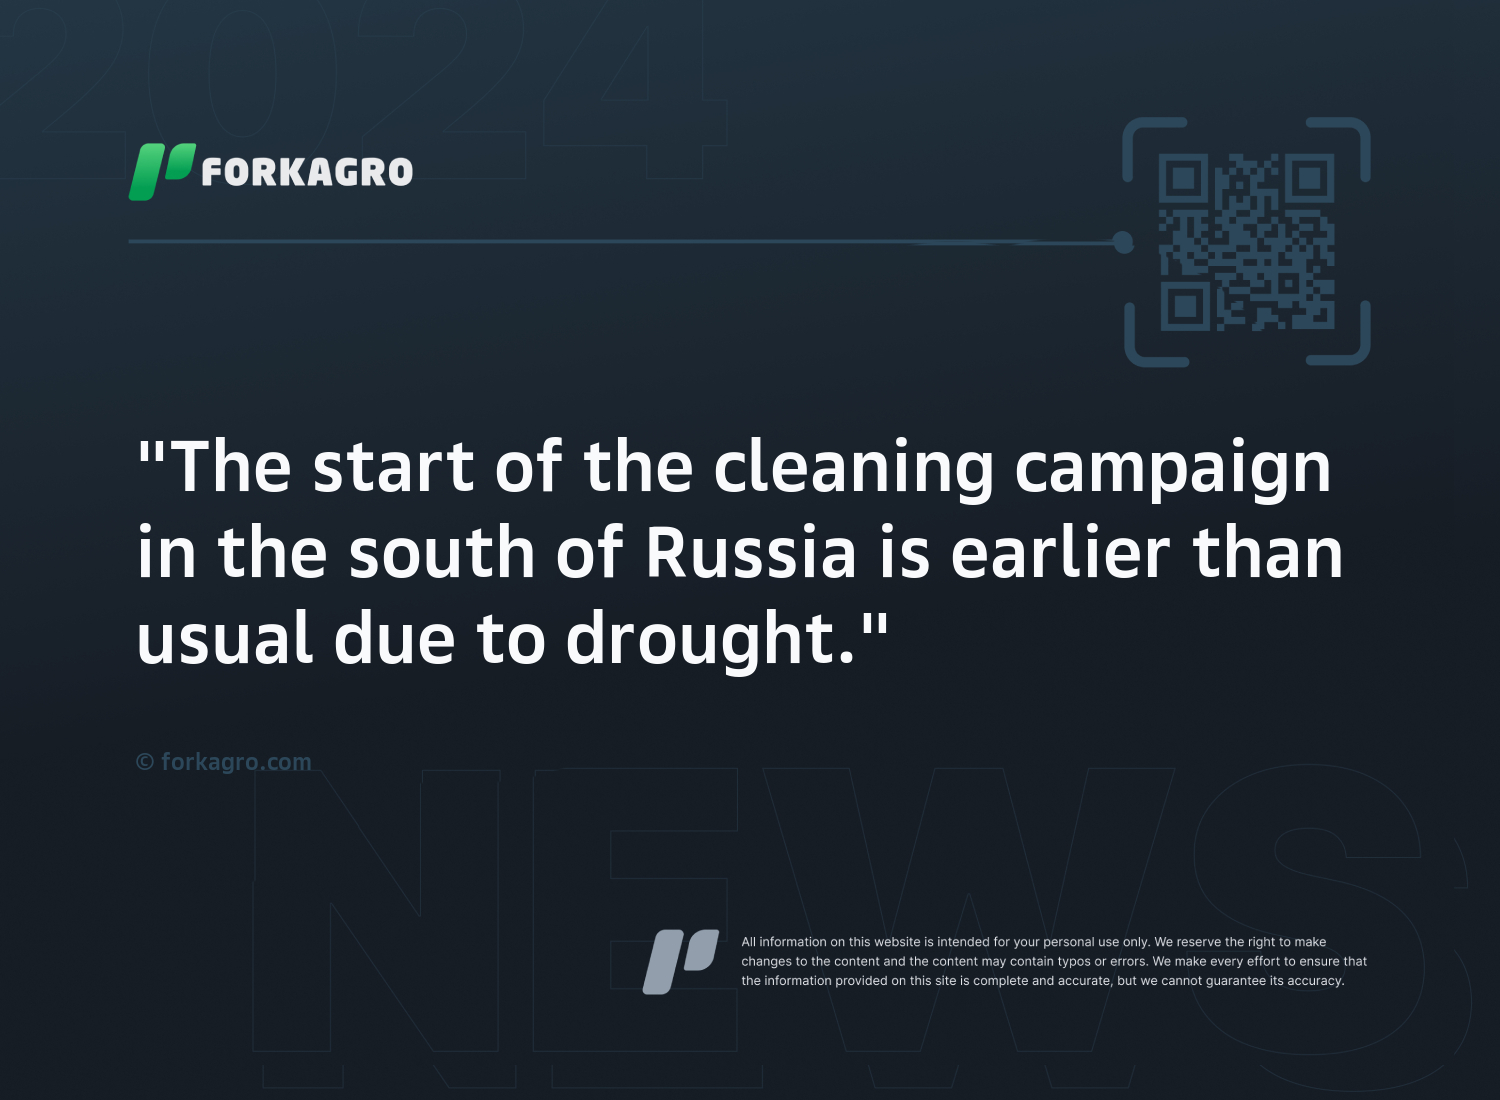 "The start of the cleaning campaign in the south of Russia is earlier than usual due to drought."